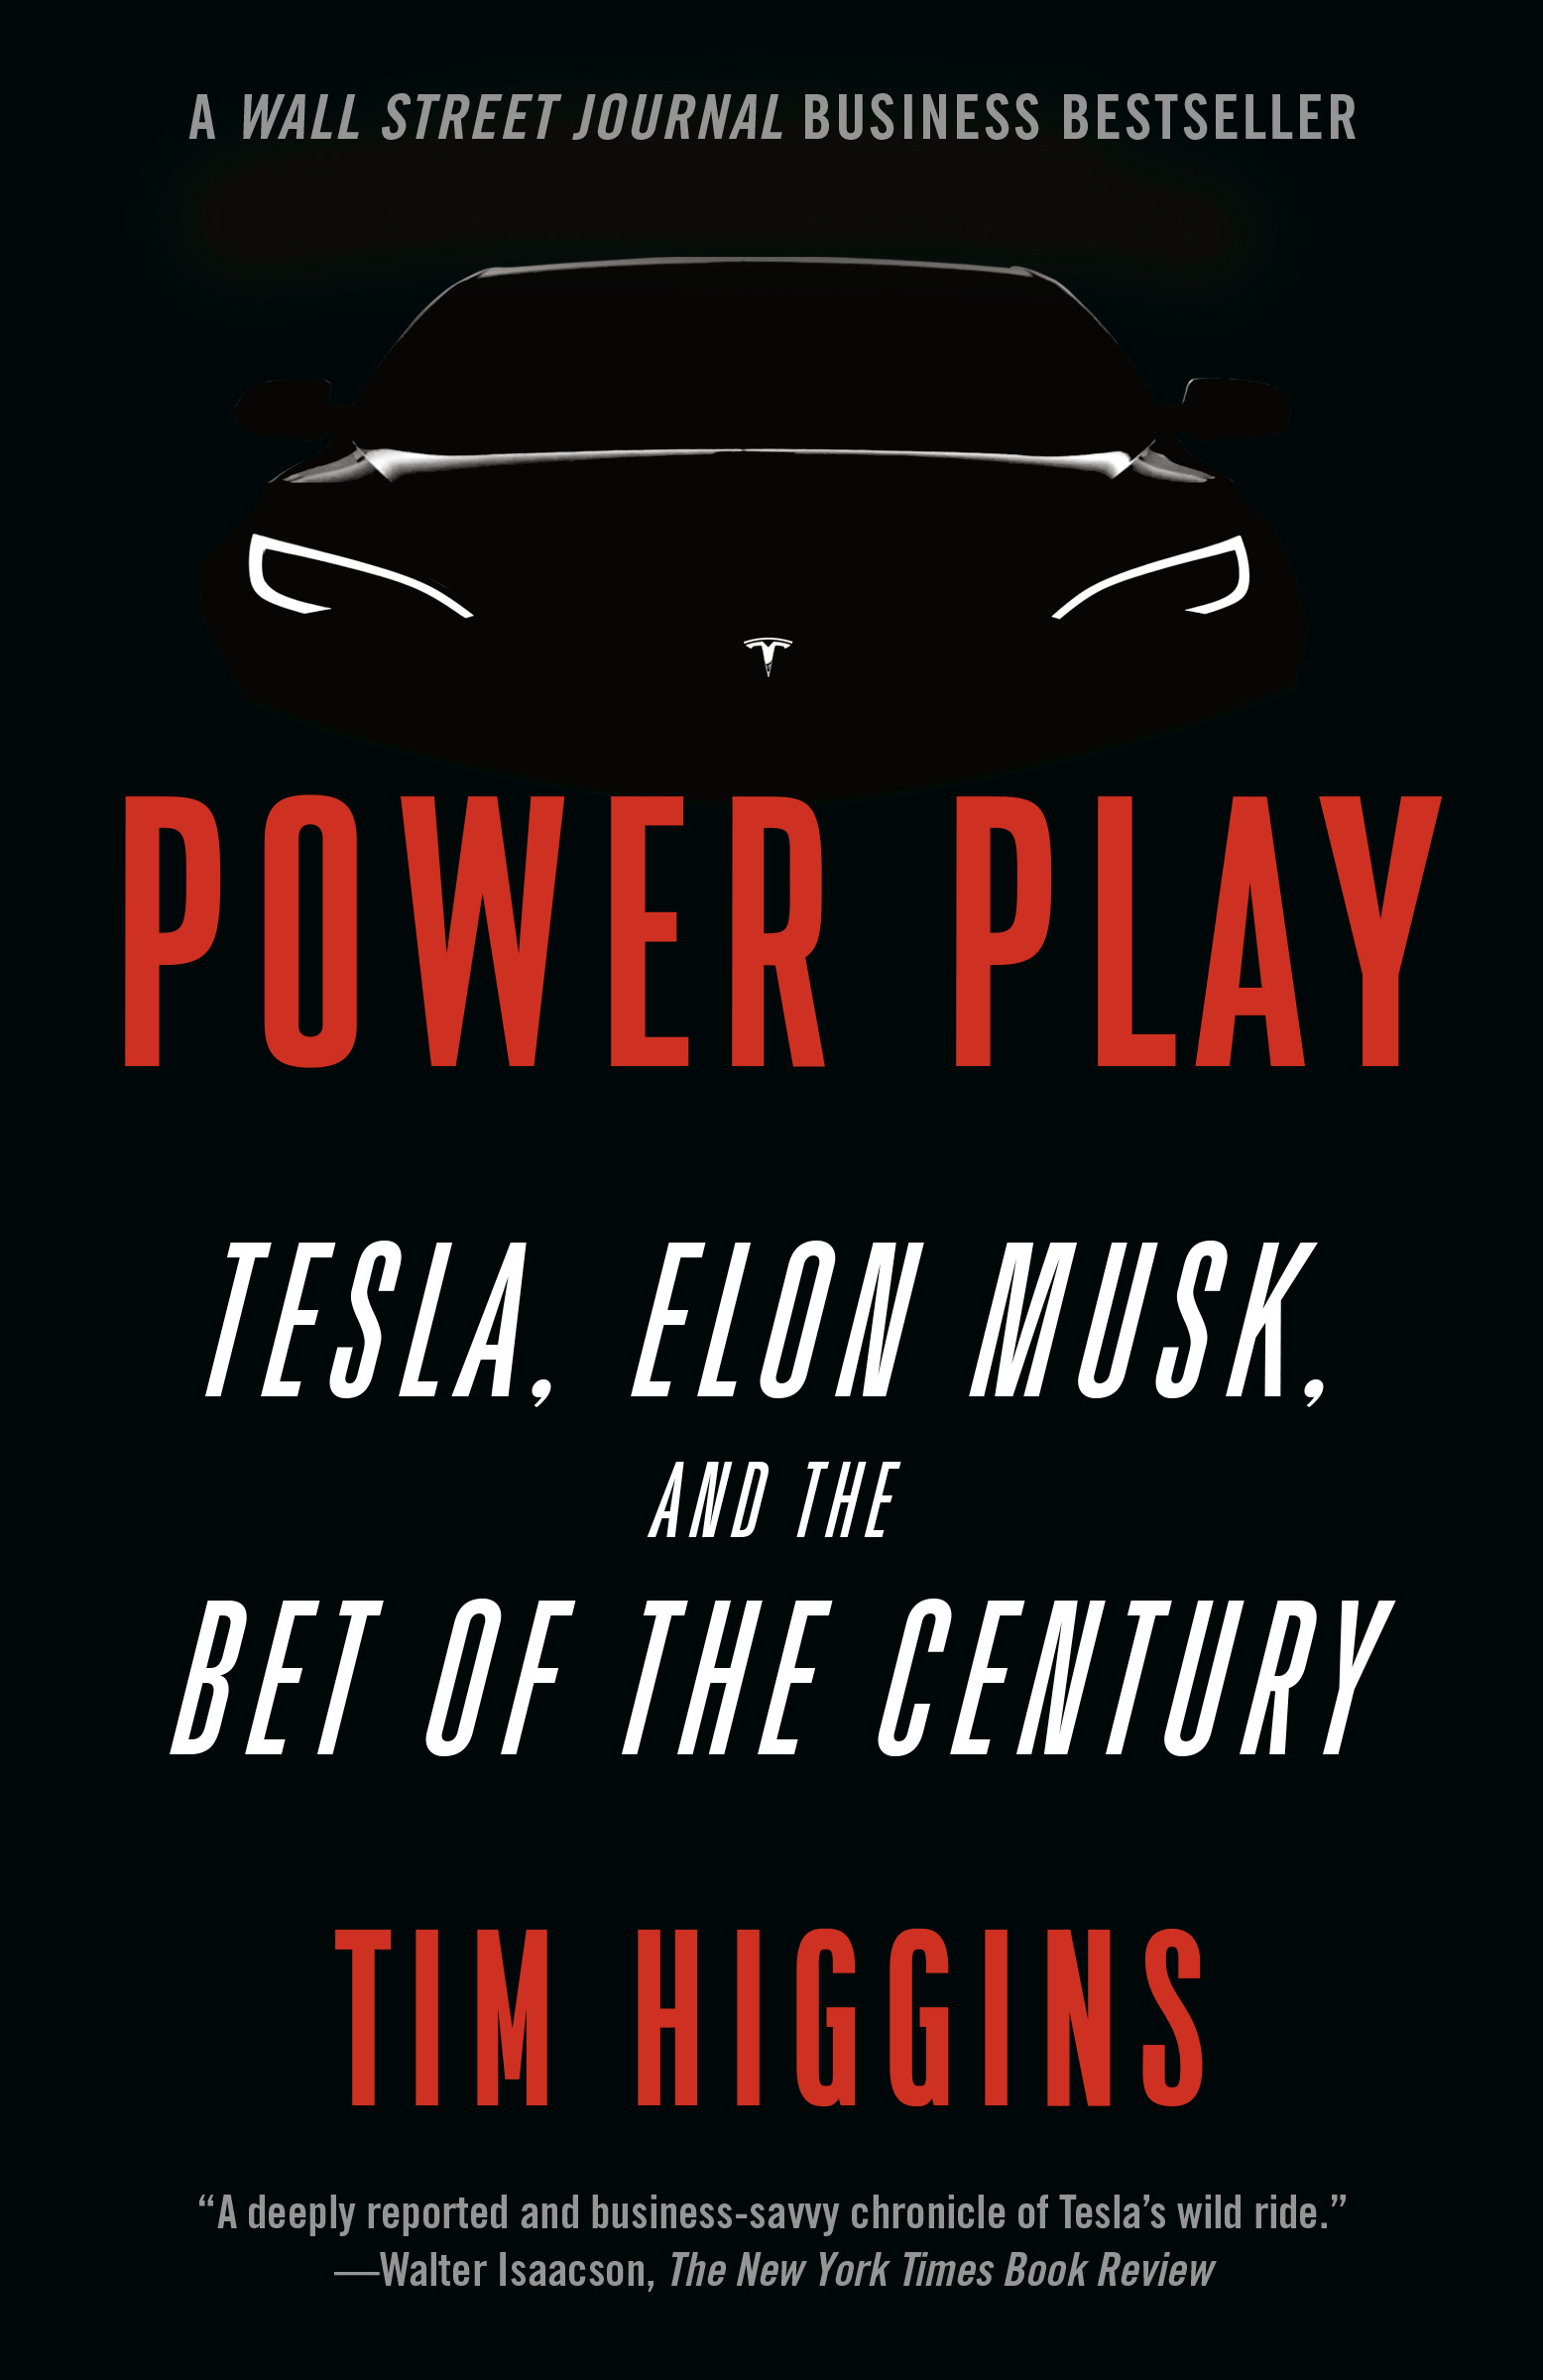 Power Play : Tesla, Elon Musk, and the Bet of the Century | Business & Management